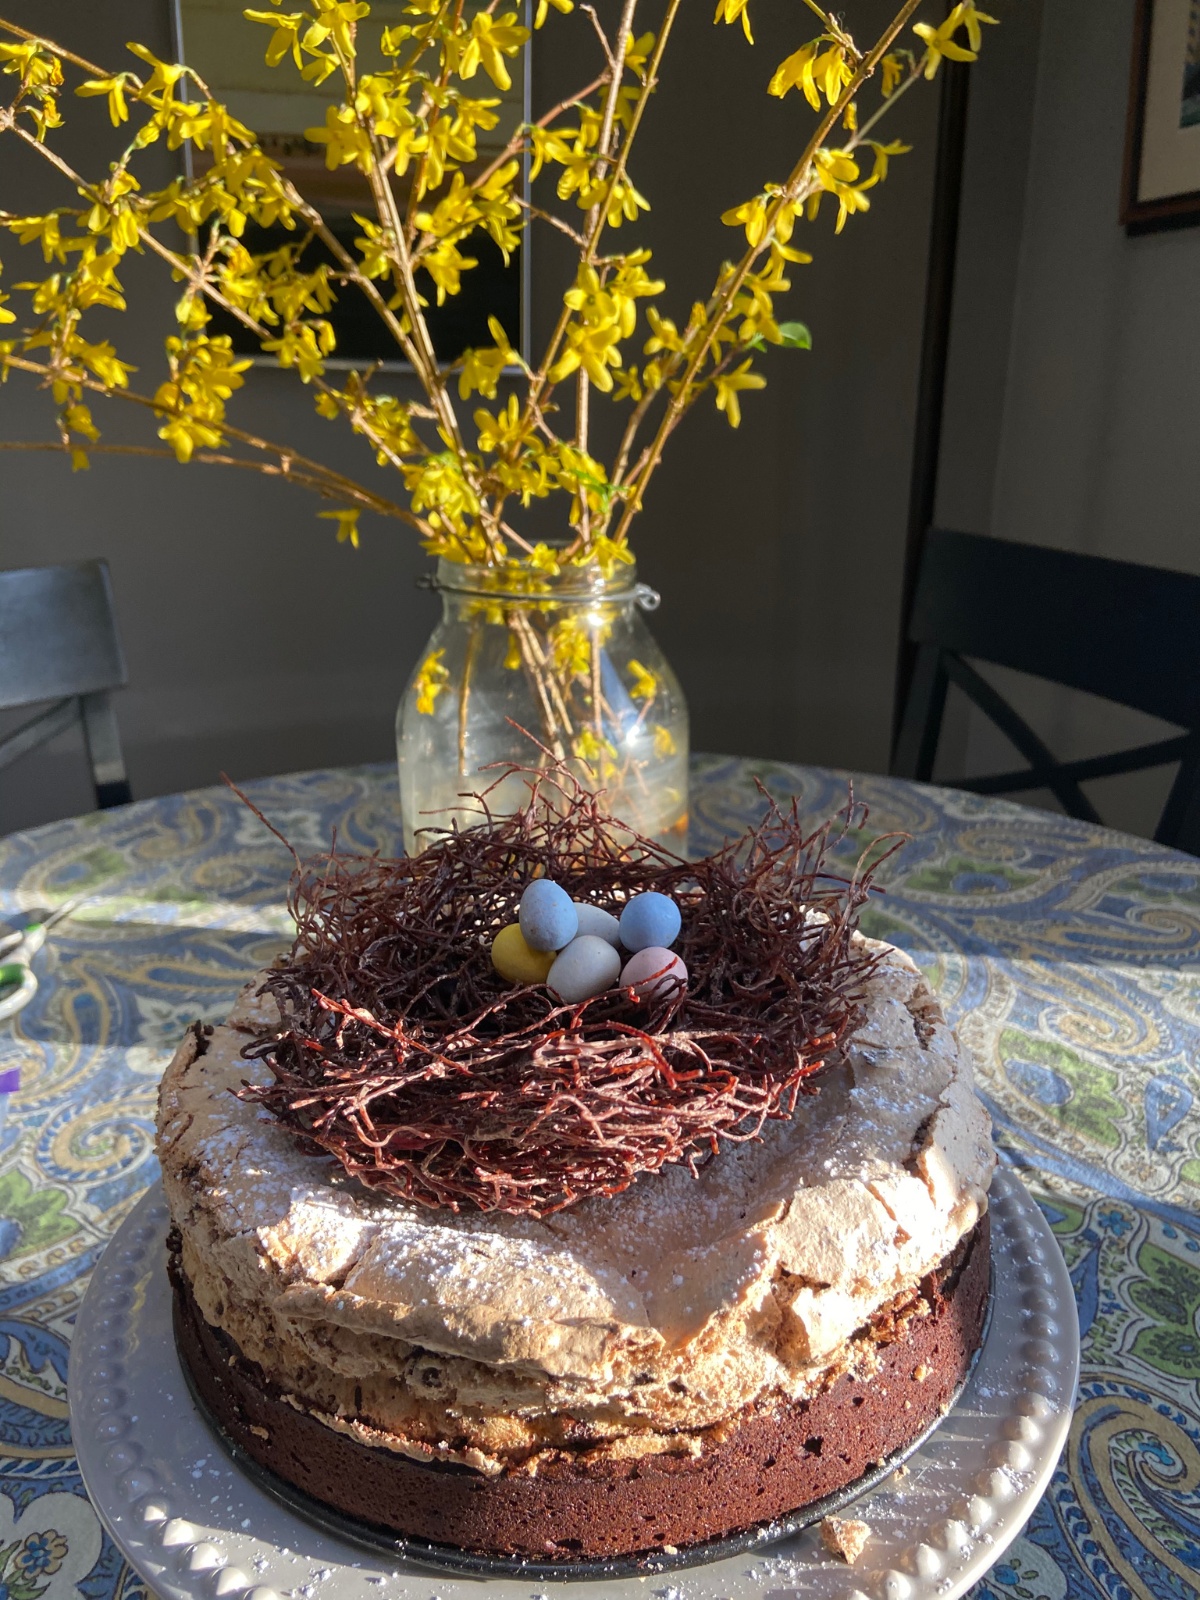 Flourless chocolate cake topped with meringue and a vermicelli bird's nest